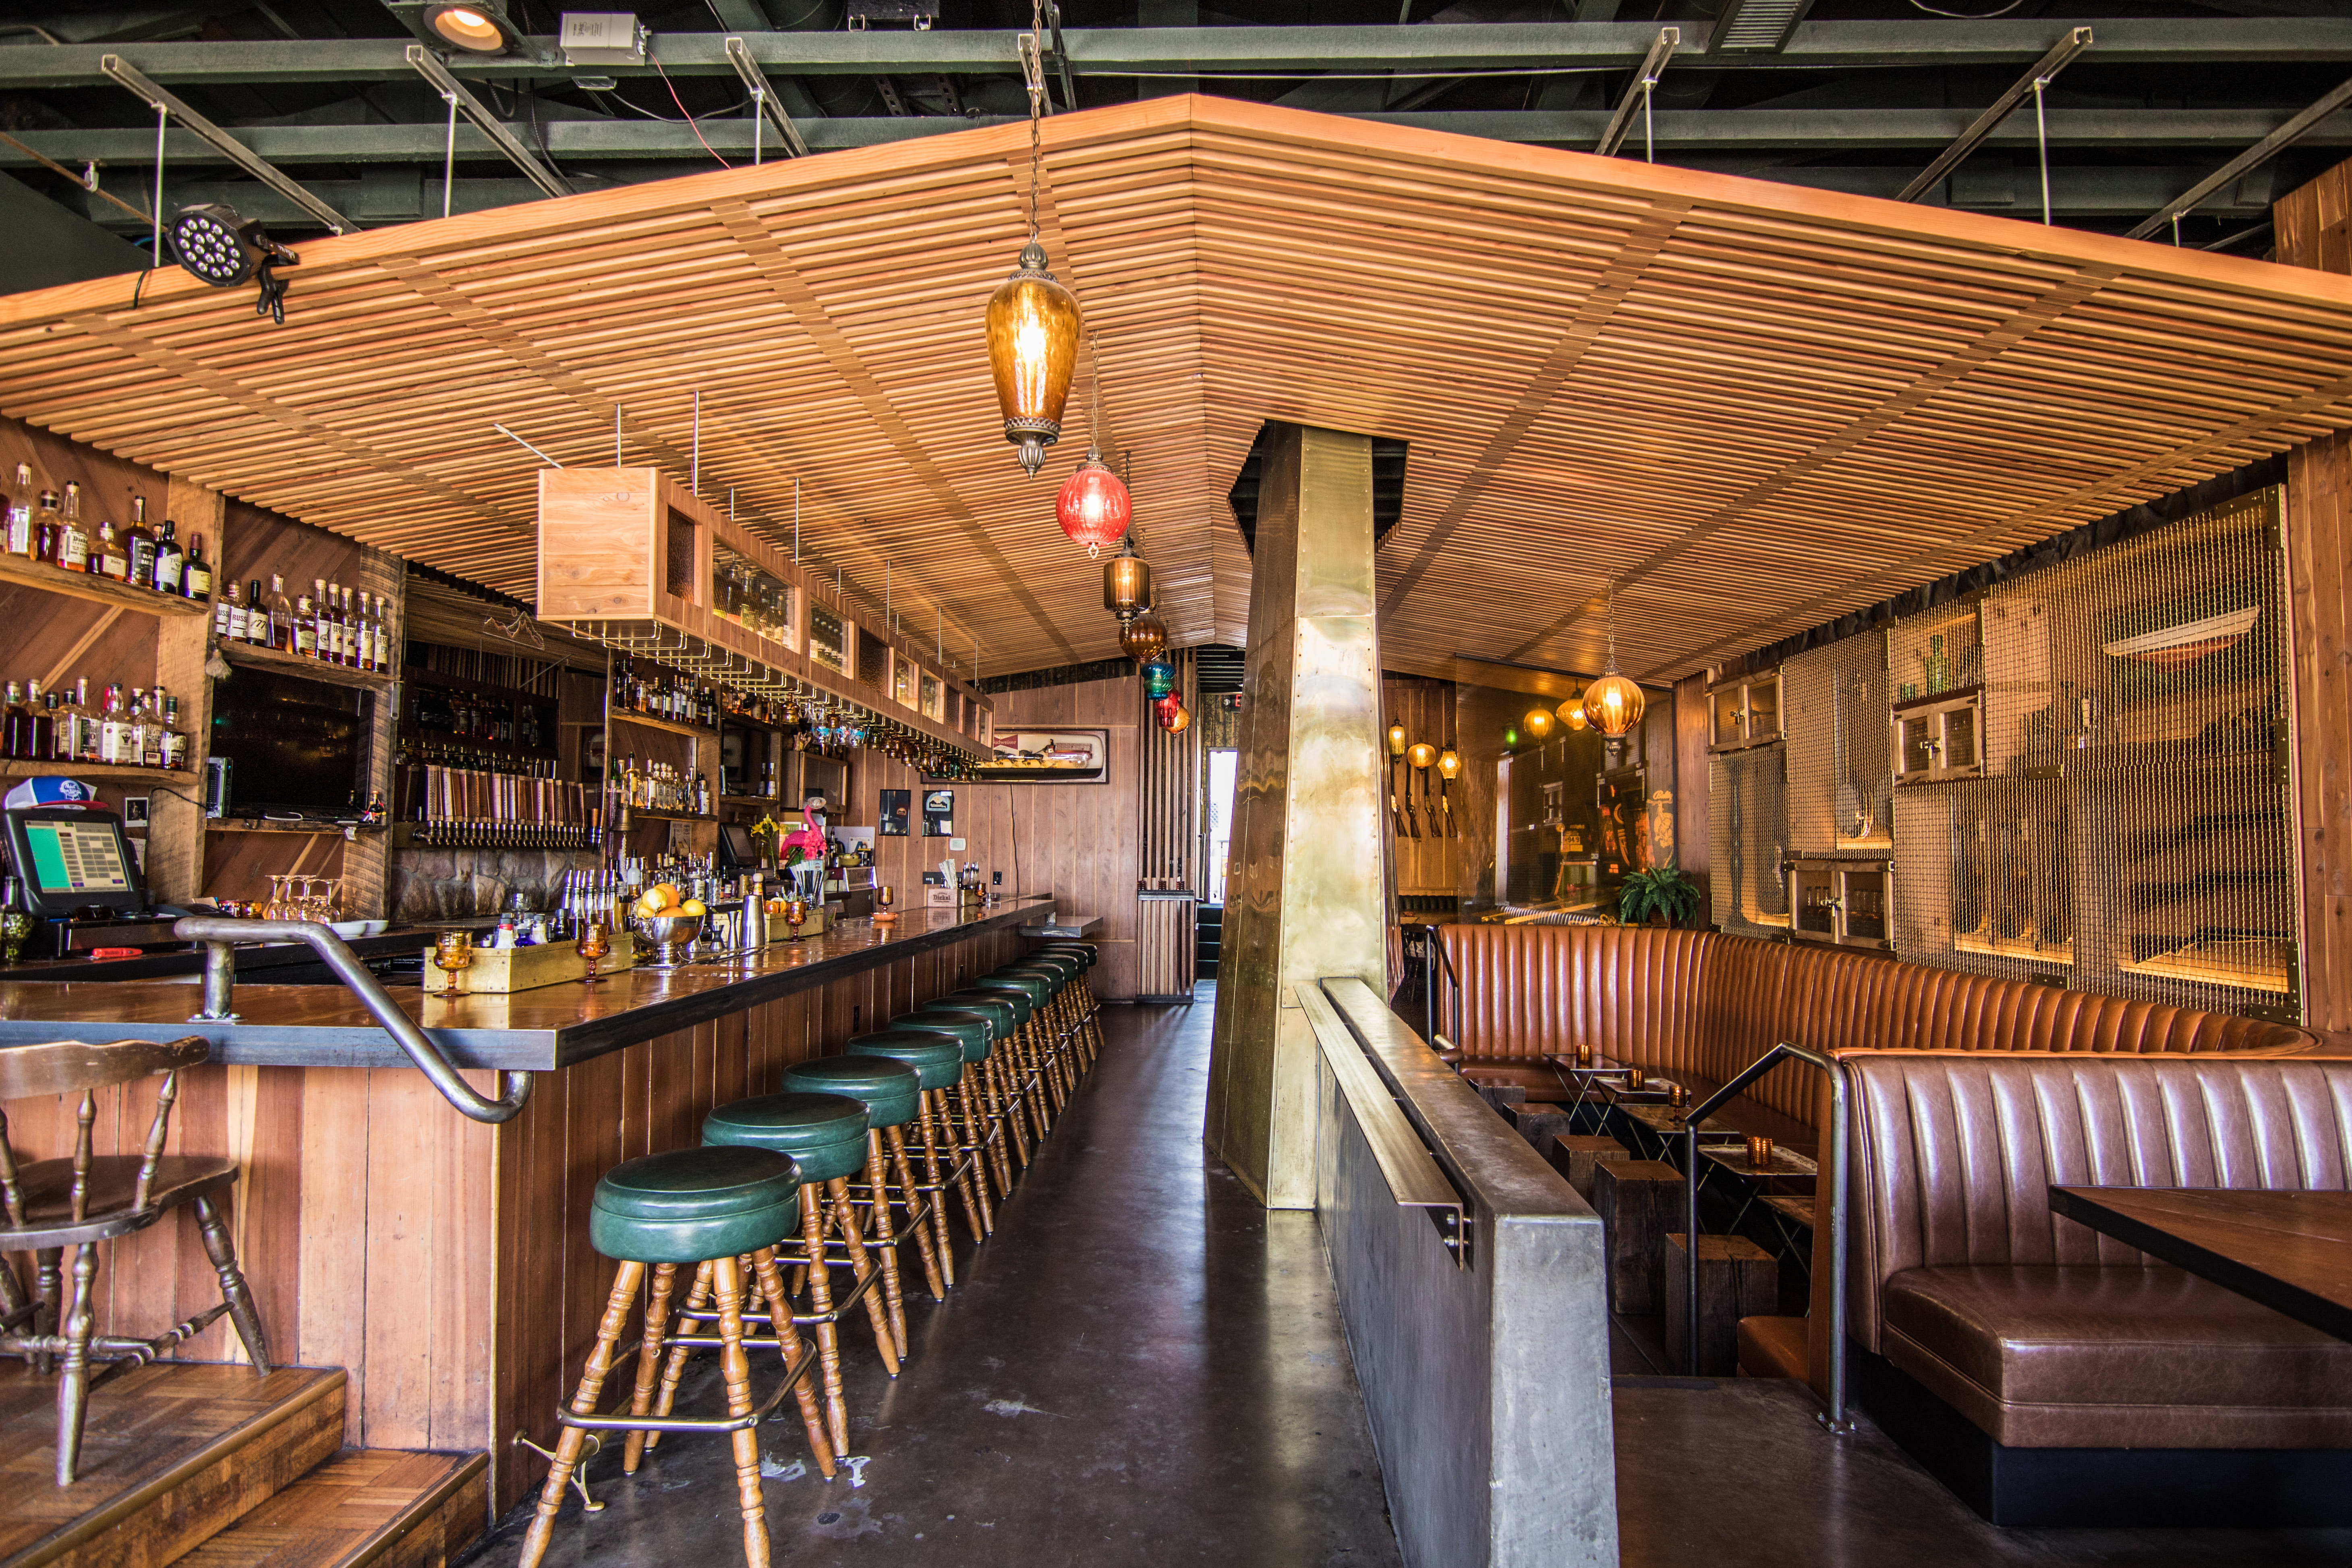 A wood-clad bar with bar stools and booths. 